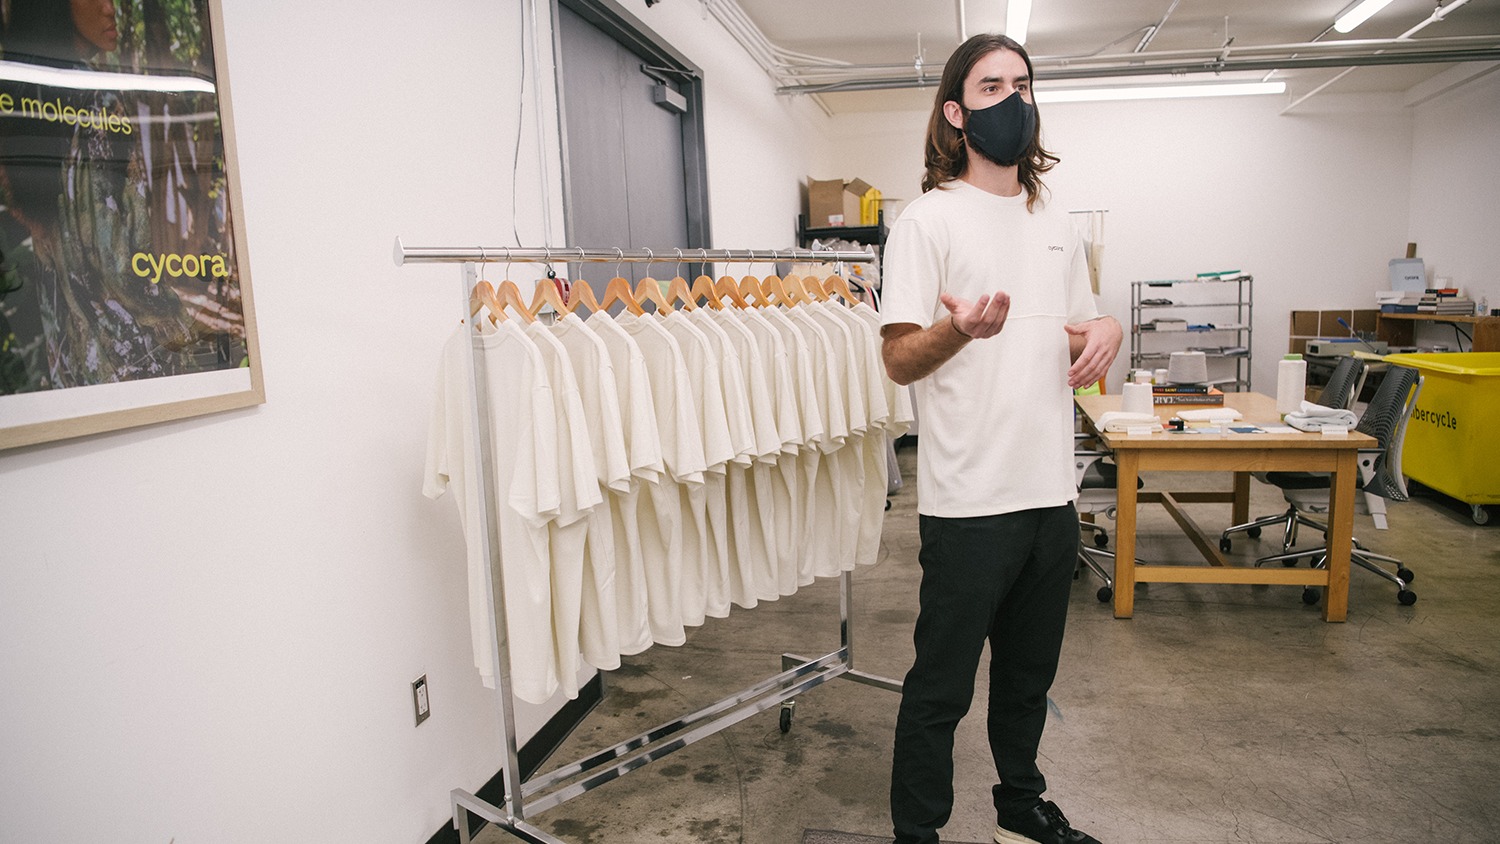 Matthew Iezzi dressed in white shirt and black pants standing in front of rolling rack of hanging clothes.